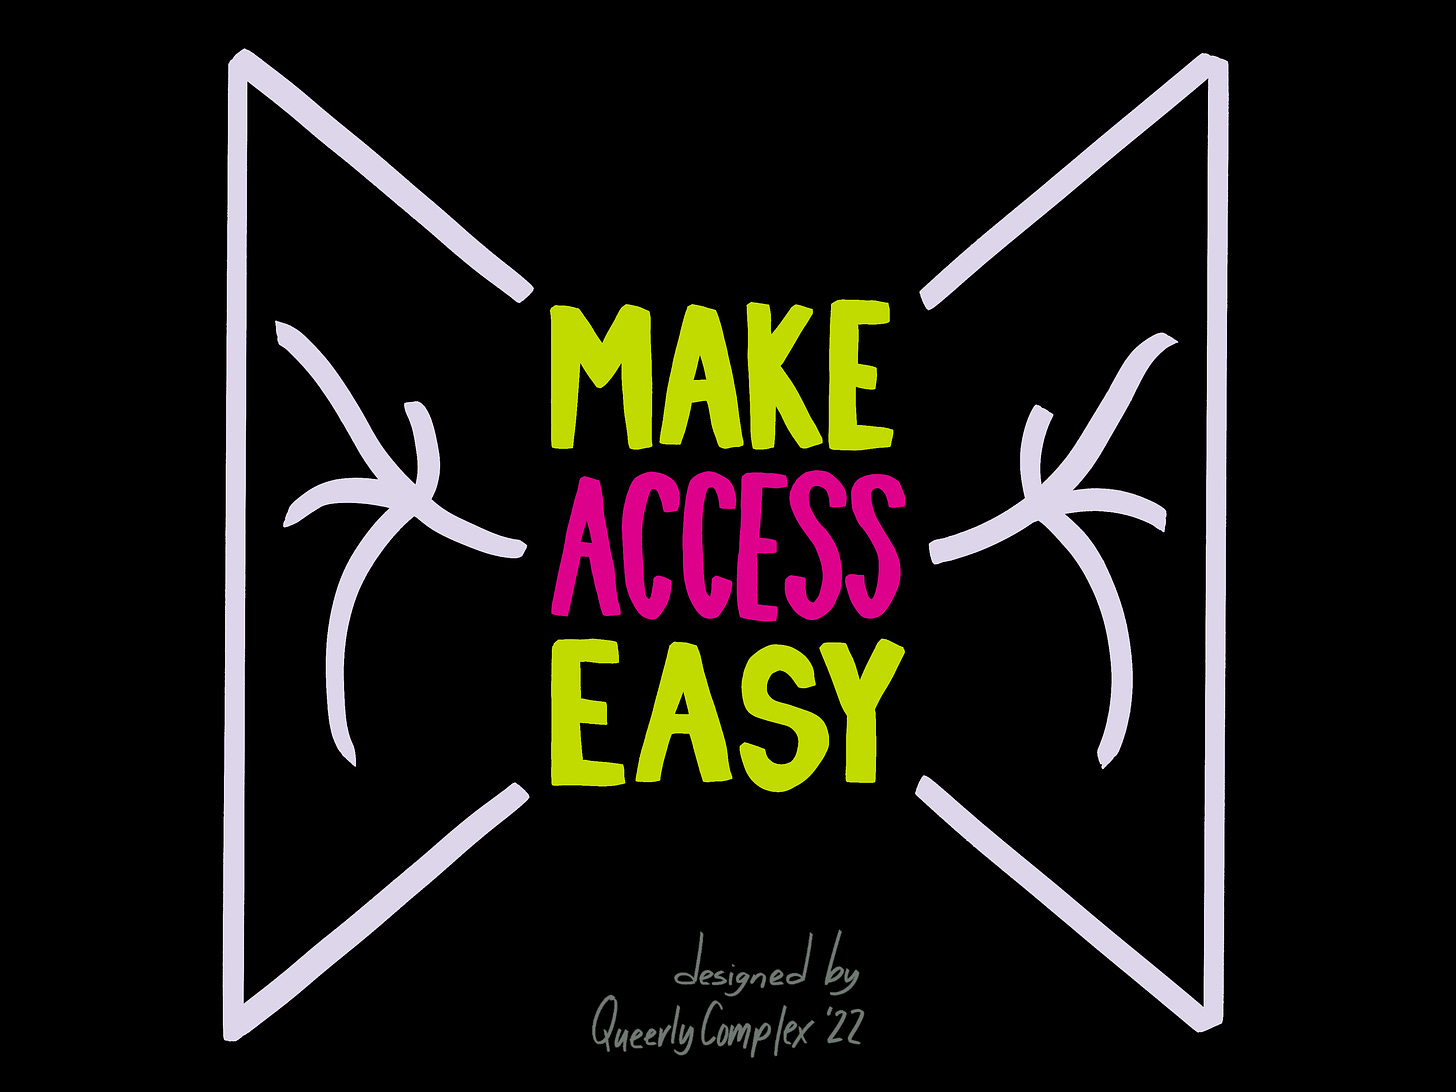 "Make Access Easy" in hand lettering with a symbol on either side that looks like someone with outstreached arms coming easily through a doorway. Designed by Queerly Complex.